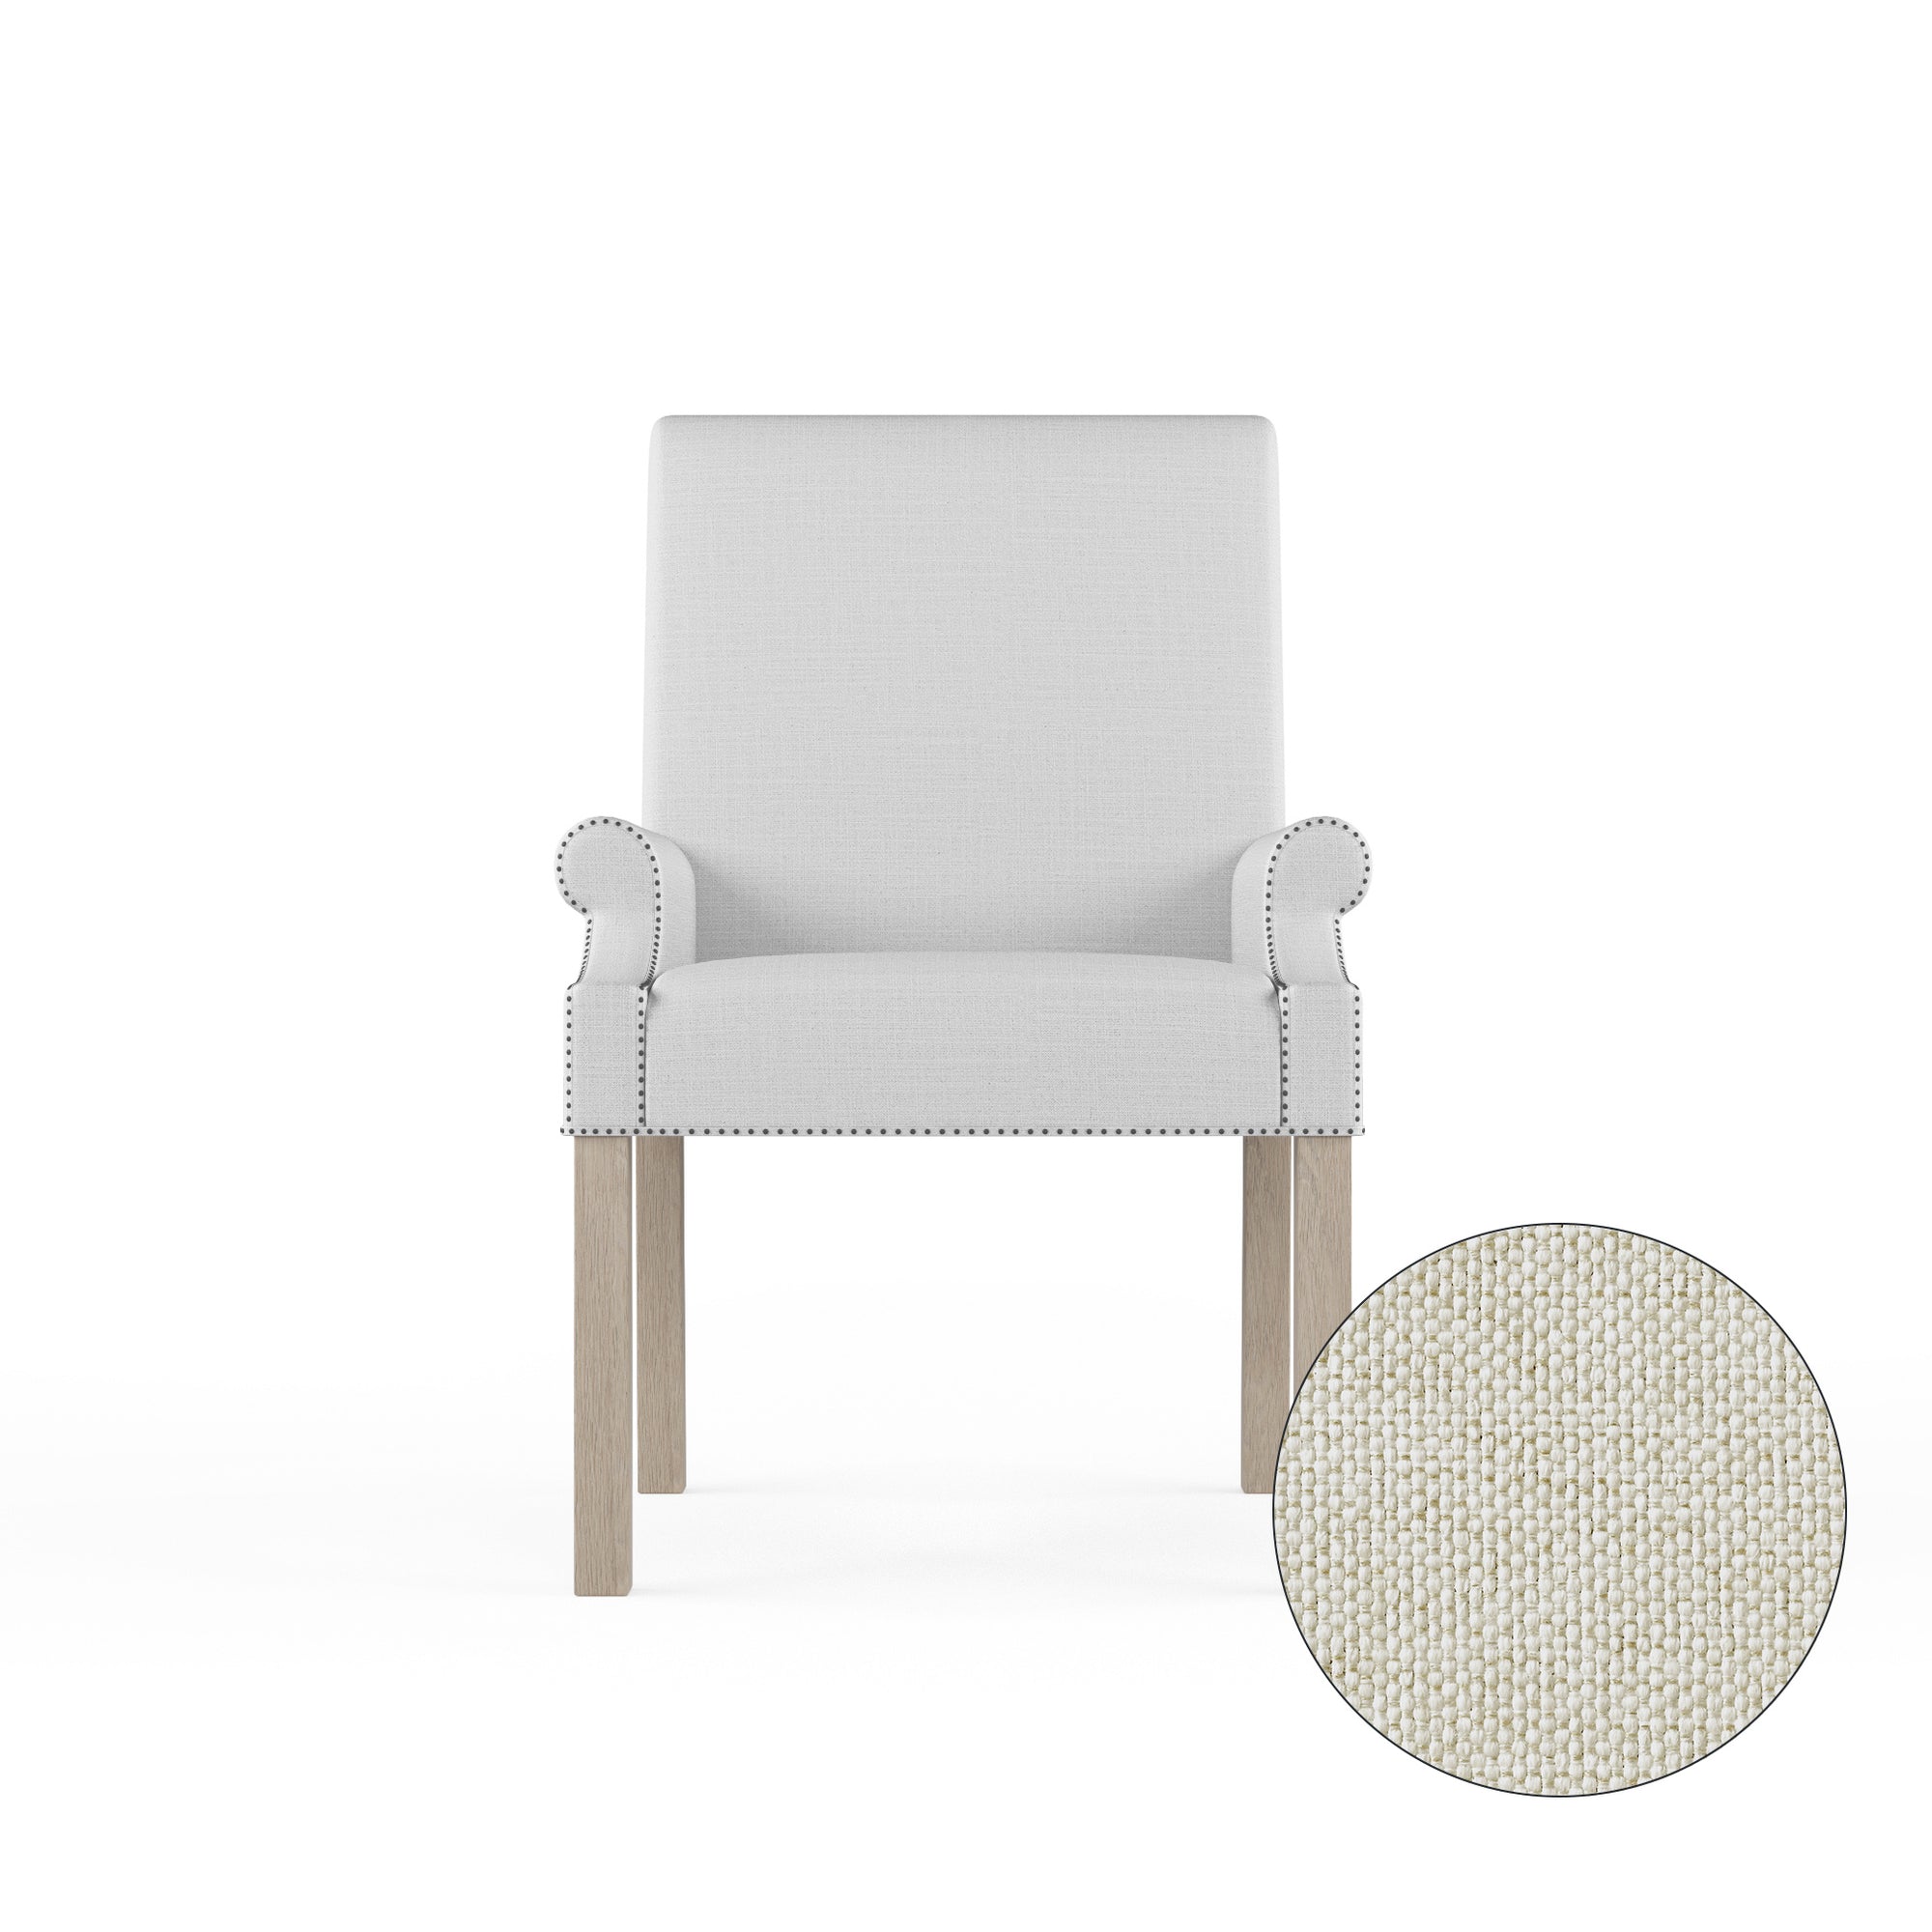 Abigail Dining Chair - Alabaster Pebble Weave Linen